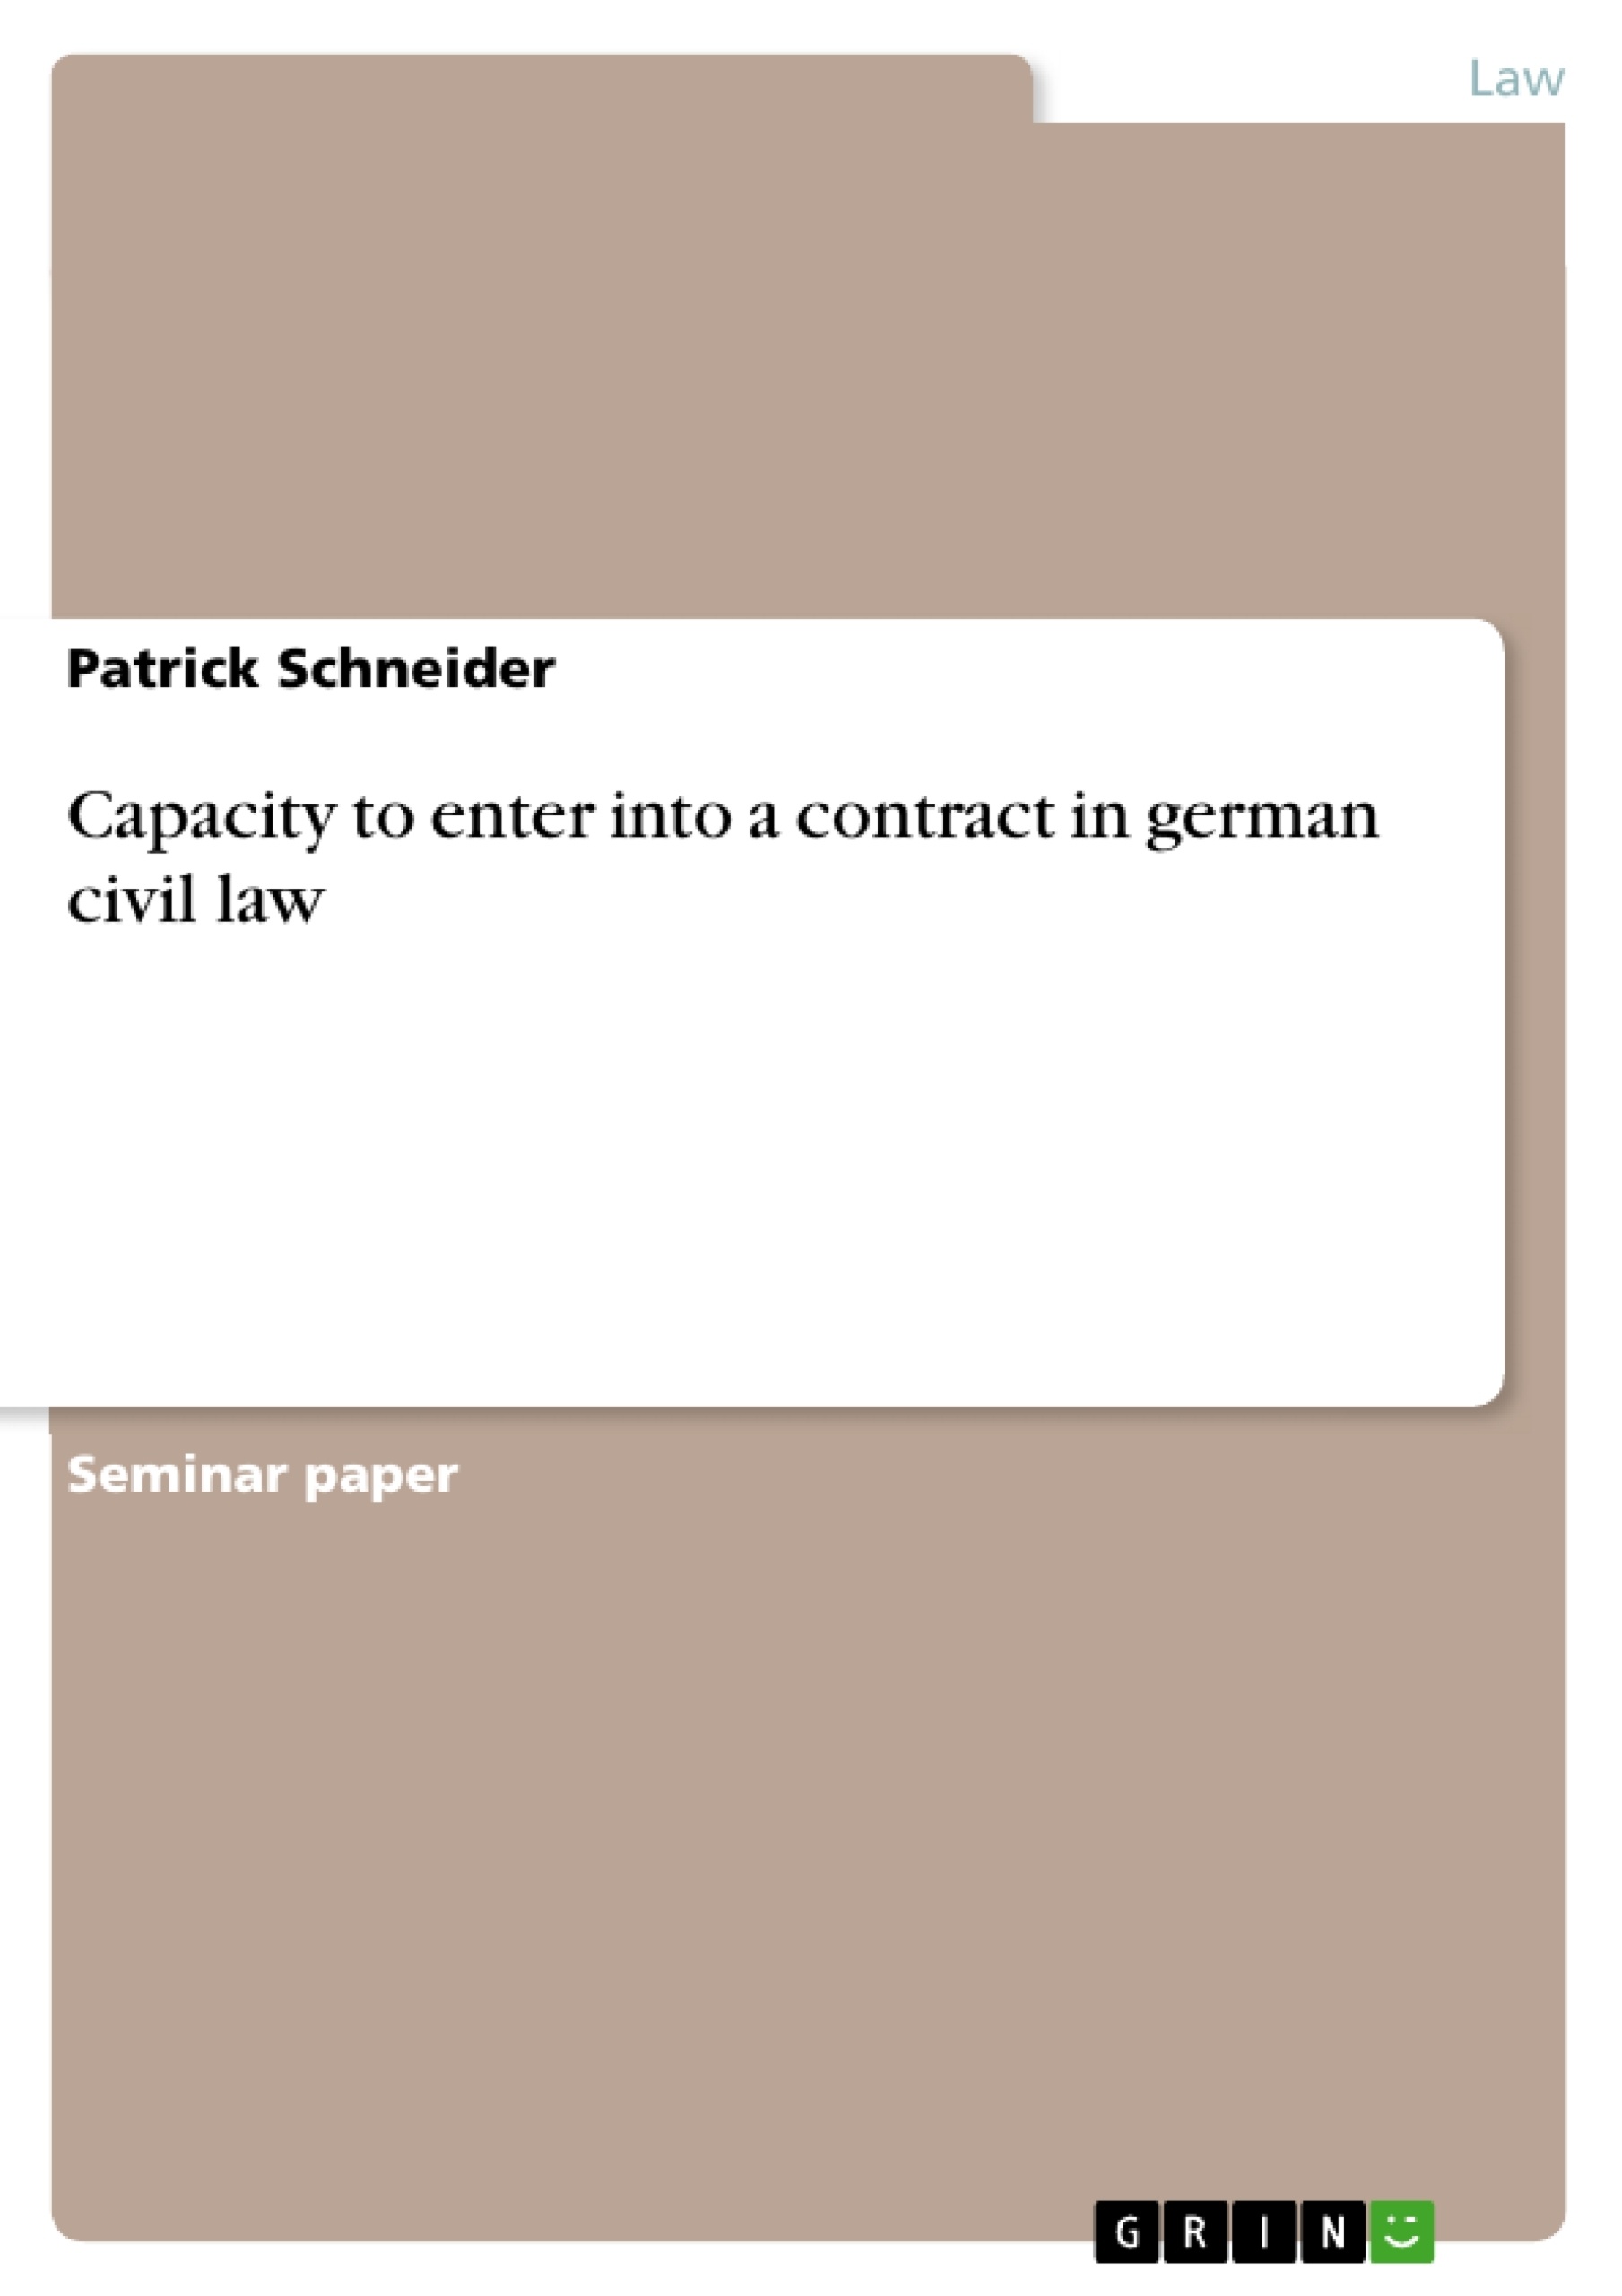 Title: Capacity to enter into a contract in german civil law